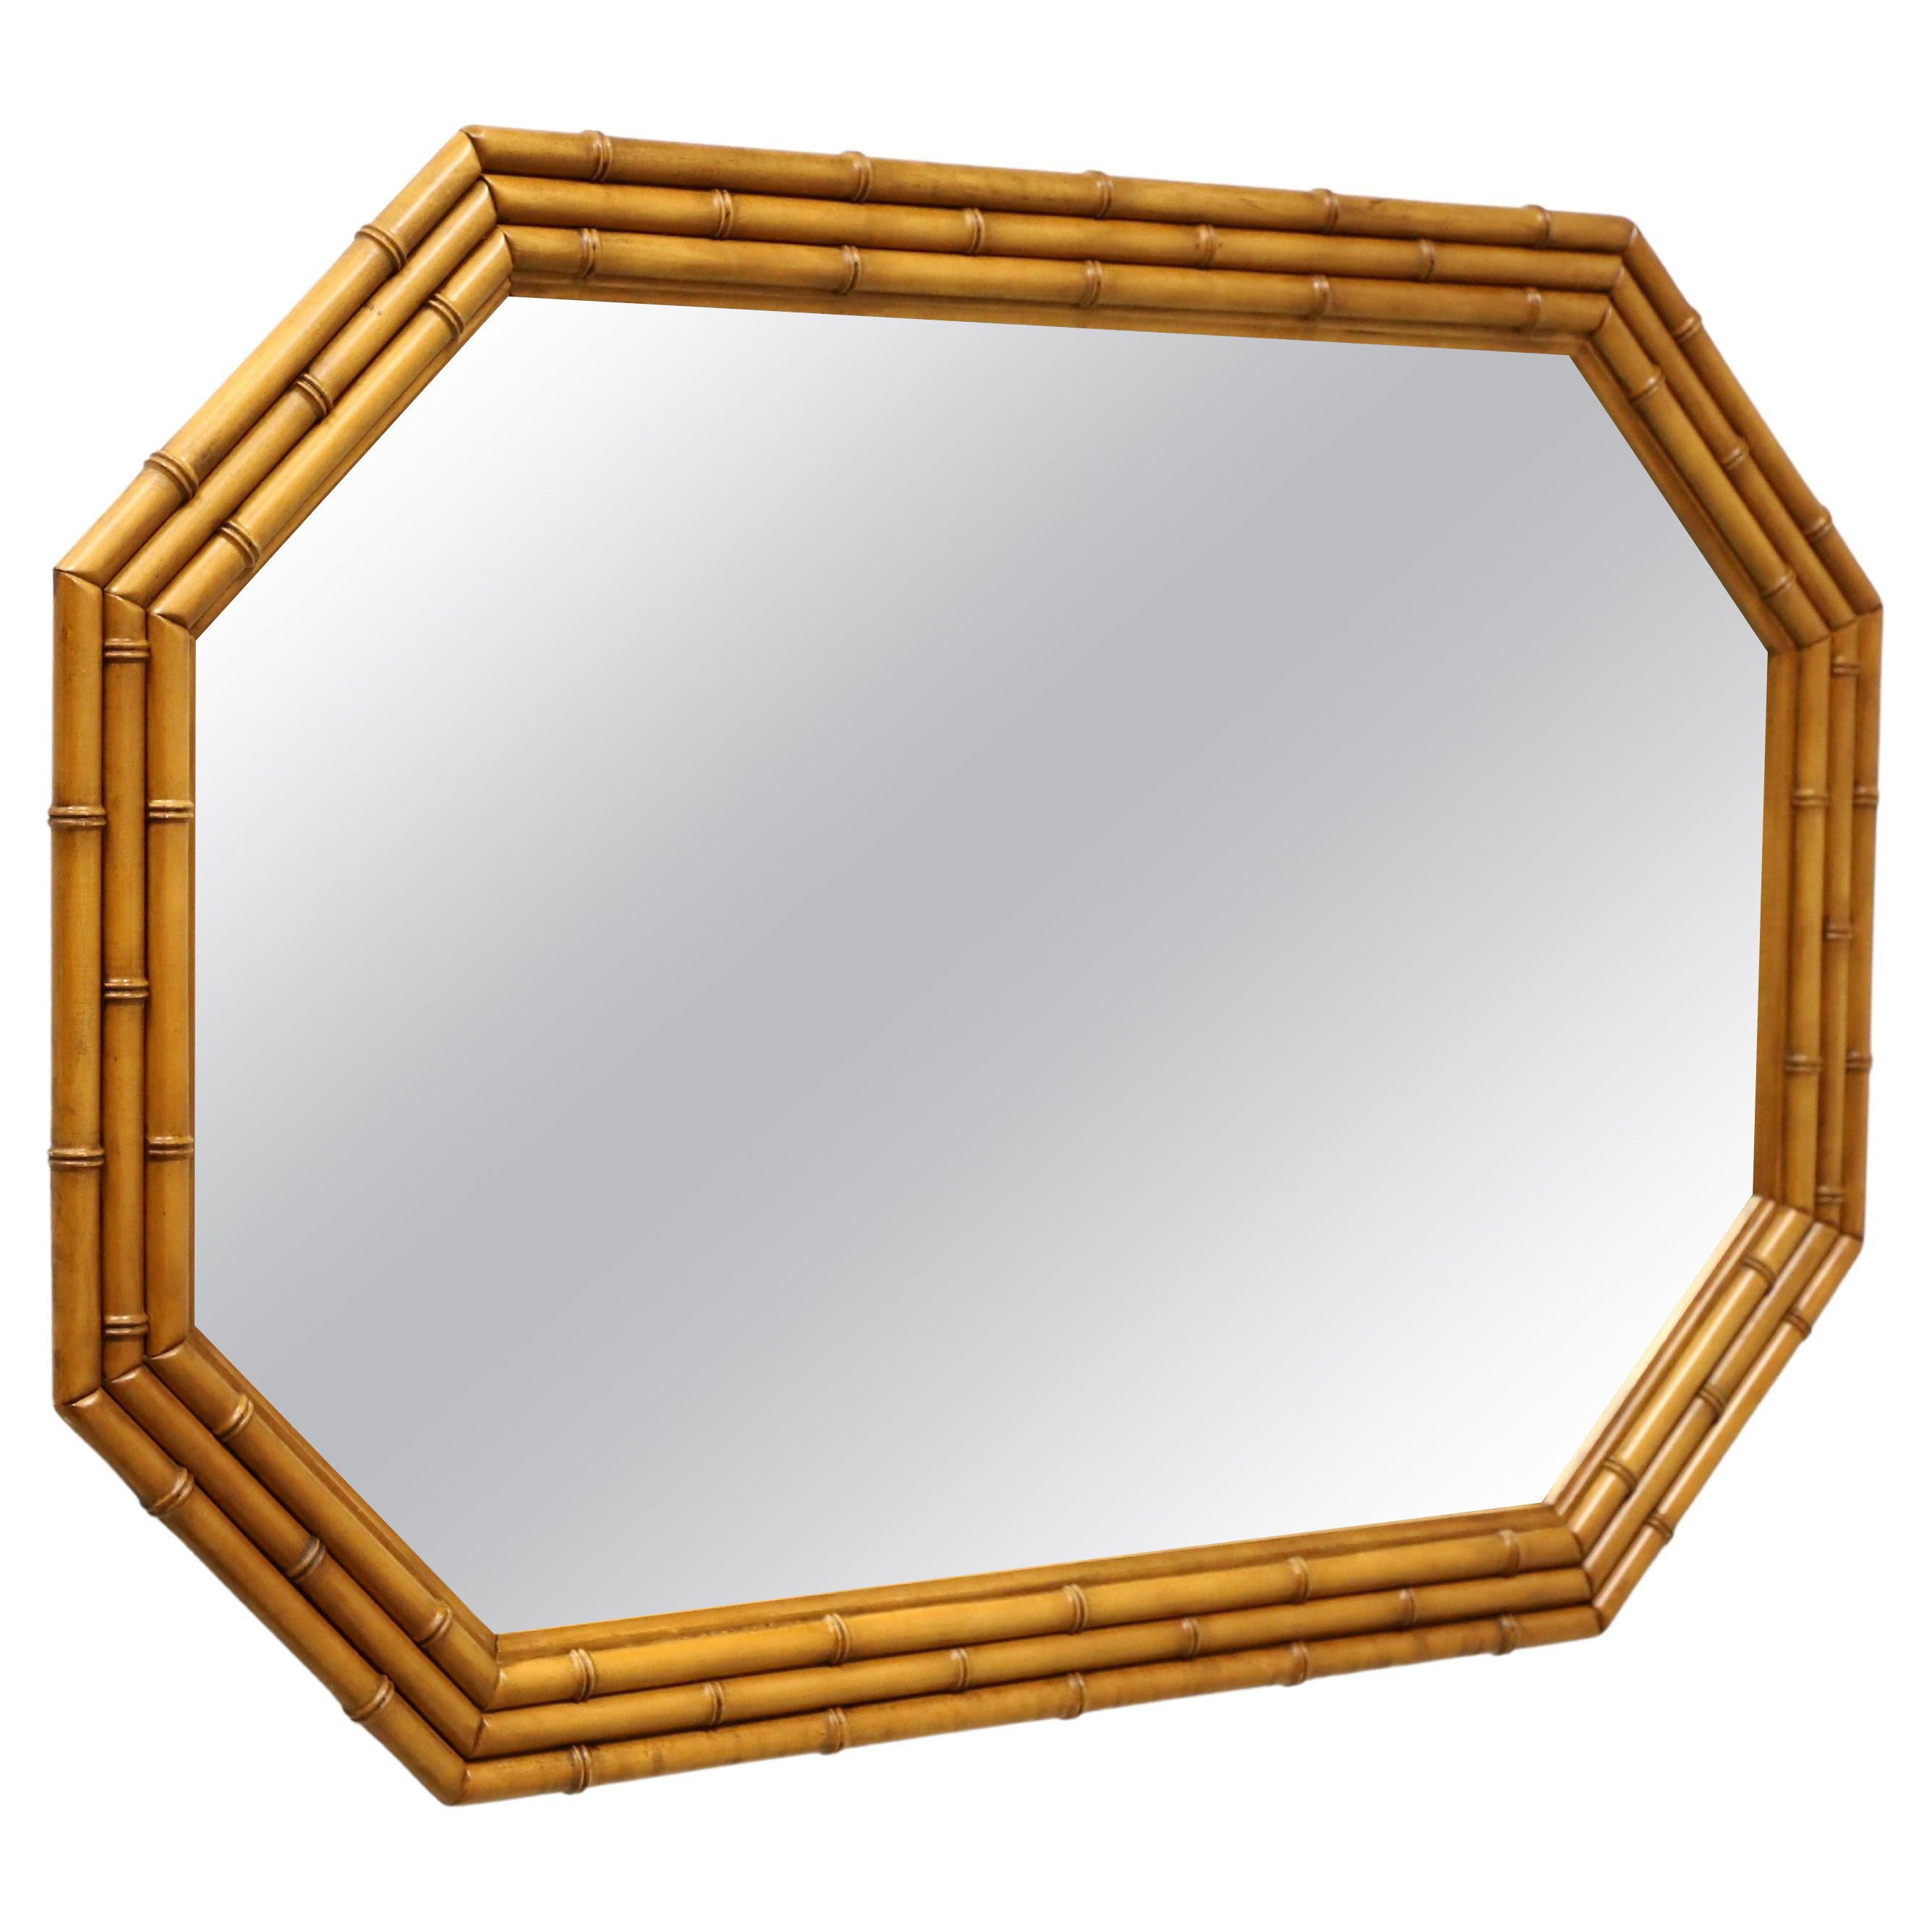 THOMASVILLE Faux Bamboo Asian Octagonal Wall Mirror For Sale